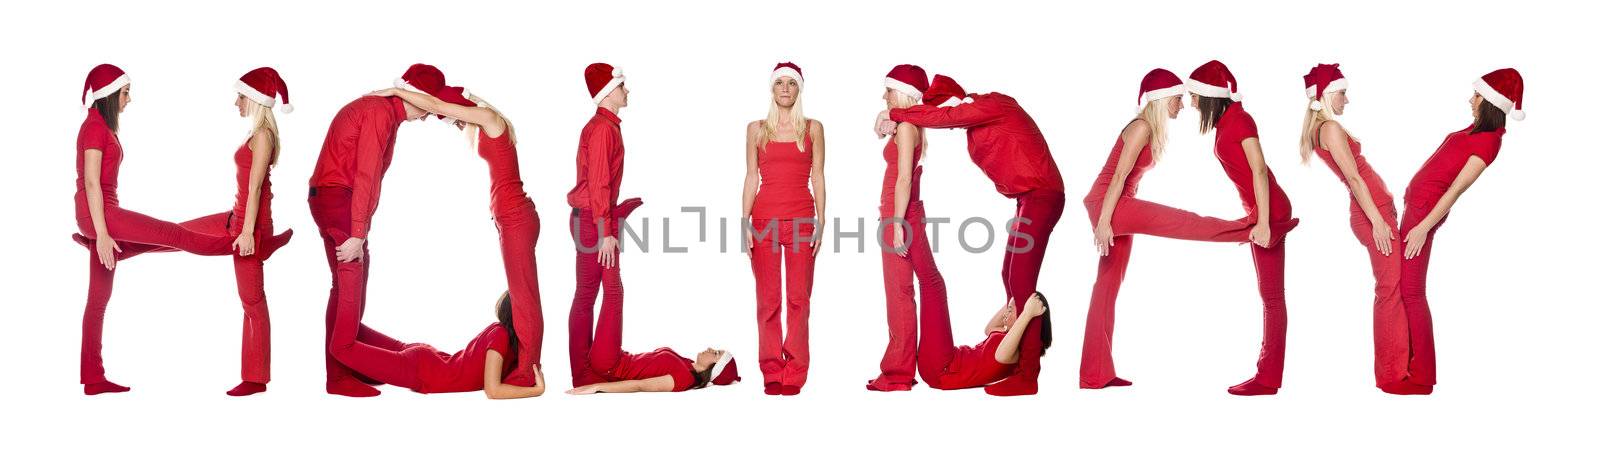 Group of red dressed people forming the word 'HOLIDAY', isolated on white.